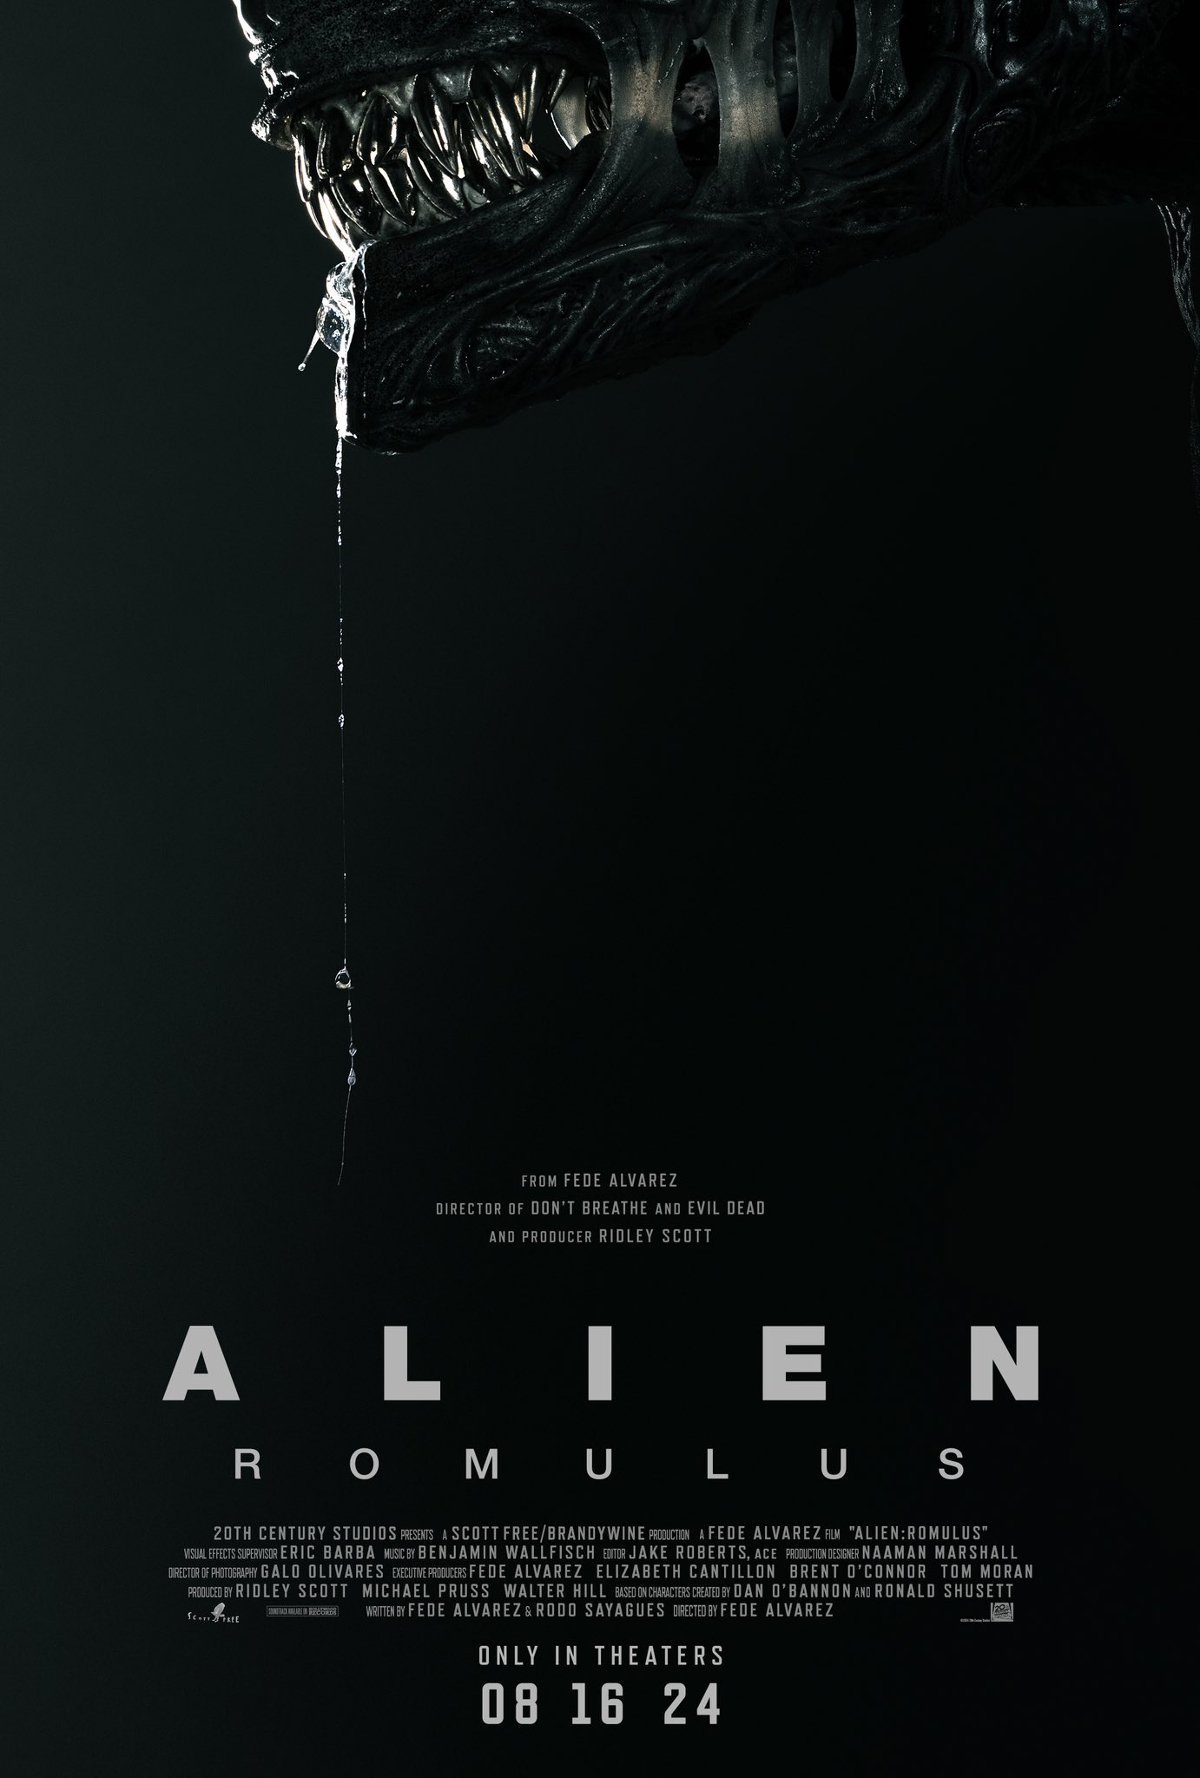 'Alien: Romulus' teaser poster featuring a xenomorph's jaw